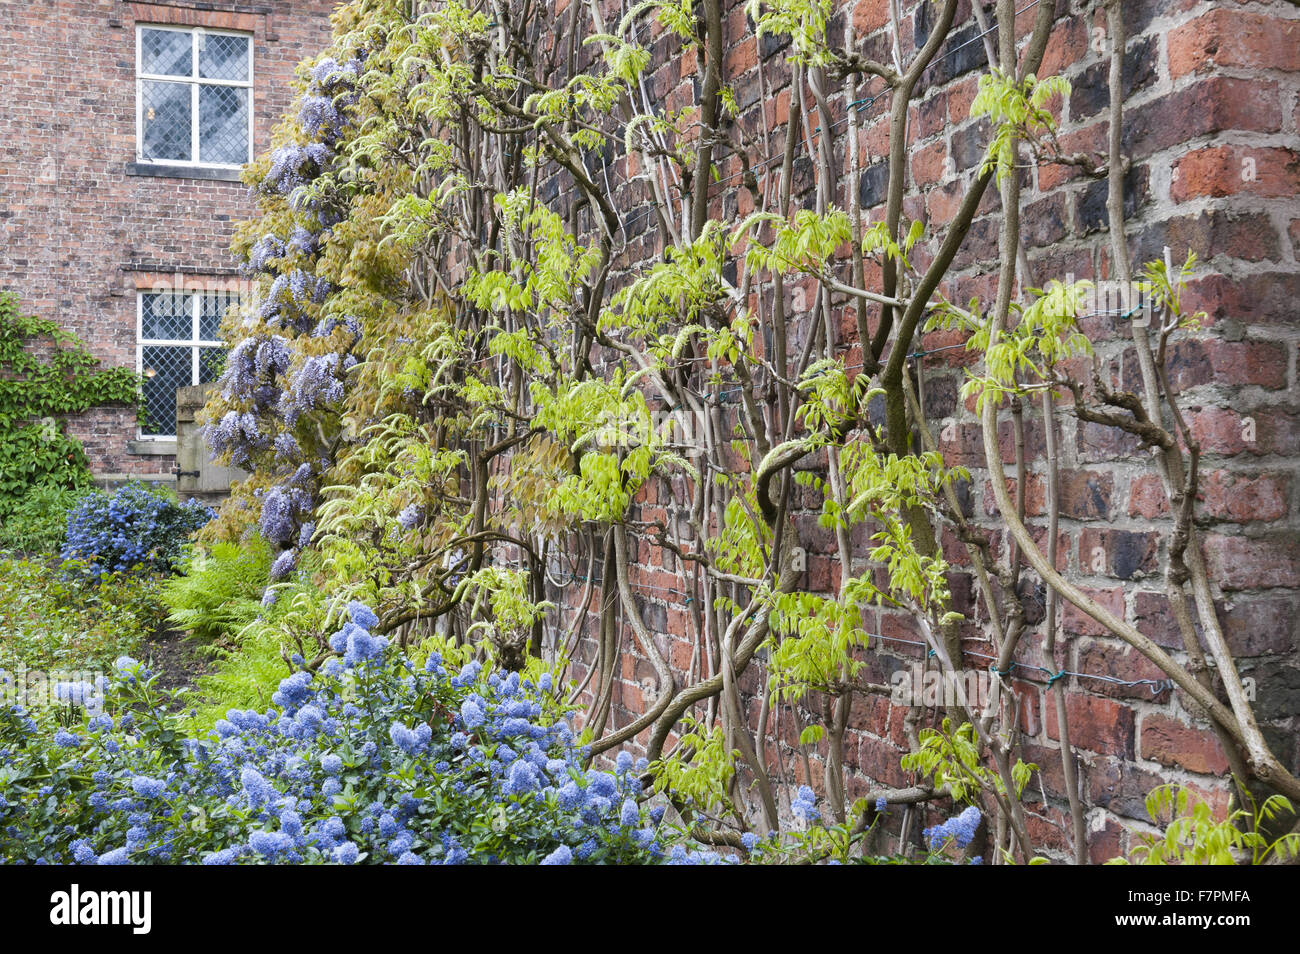 The gardens in the spring at Rufford Old Hall, Lancashire. Rufford Old Hall is more than 500 years old, and the gardens are Victorian in style. Stock Photo